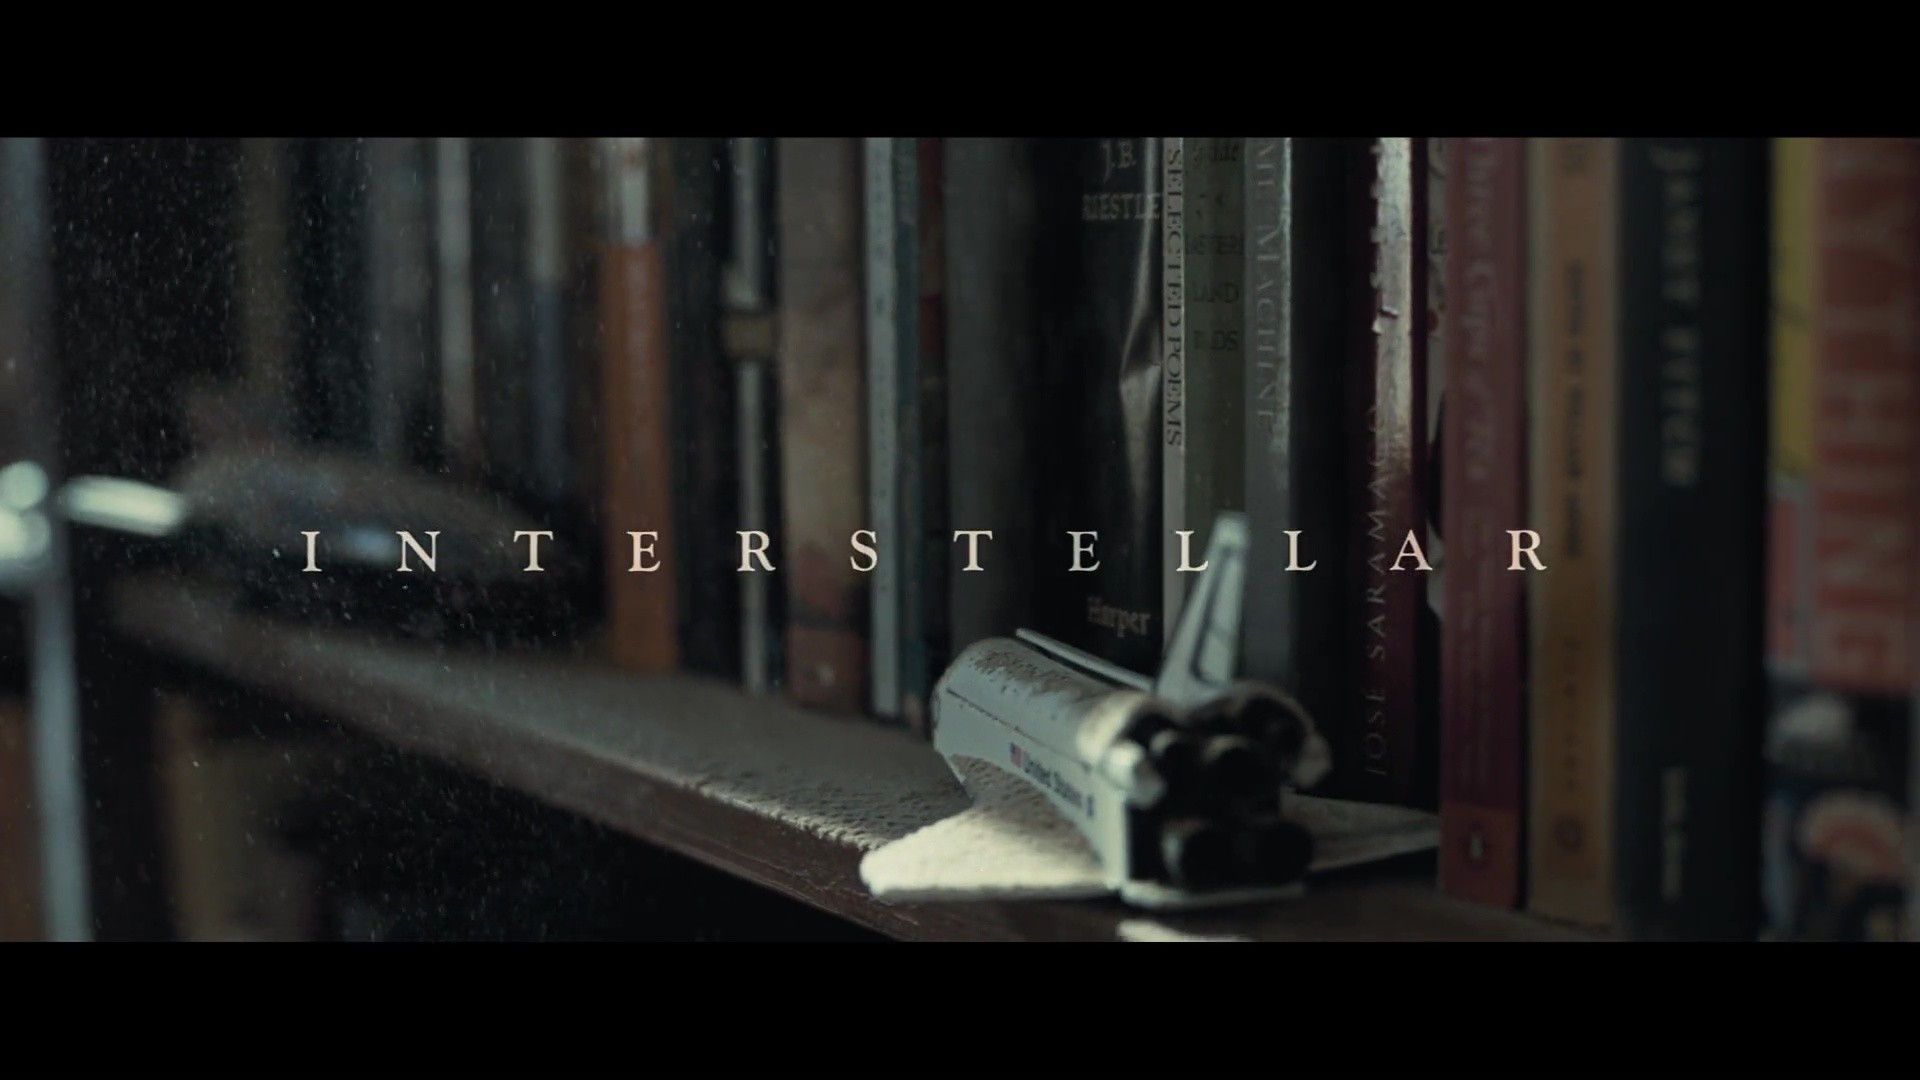 1920x1080 Why it took me so long to watch this? Interstellar edition | ÎÏÎ¿Î»ÏÏÏÏ  ÎÎ¹Î±Î»Î»Î±ÎºÏÎ¹ÎºÏÏ